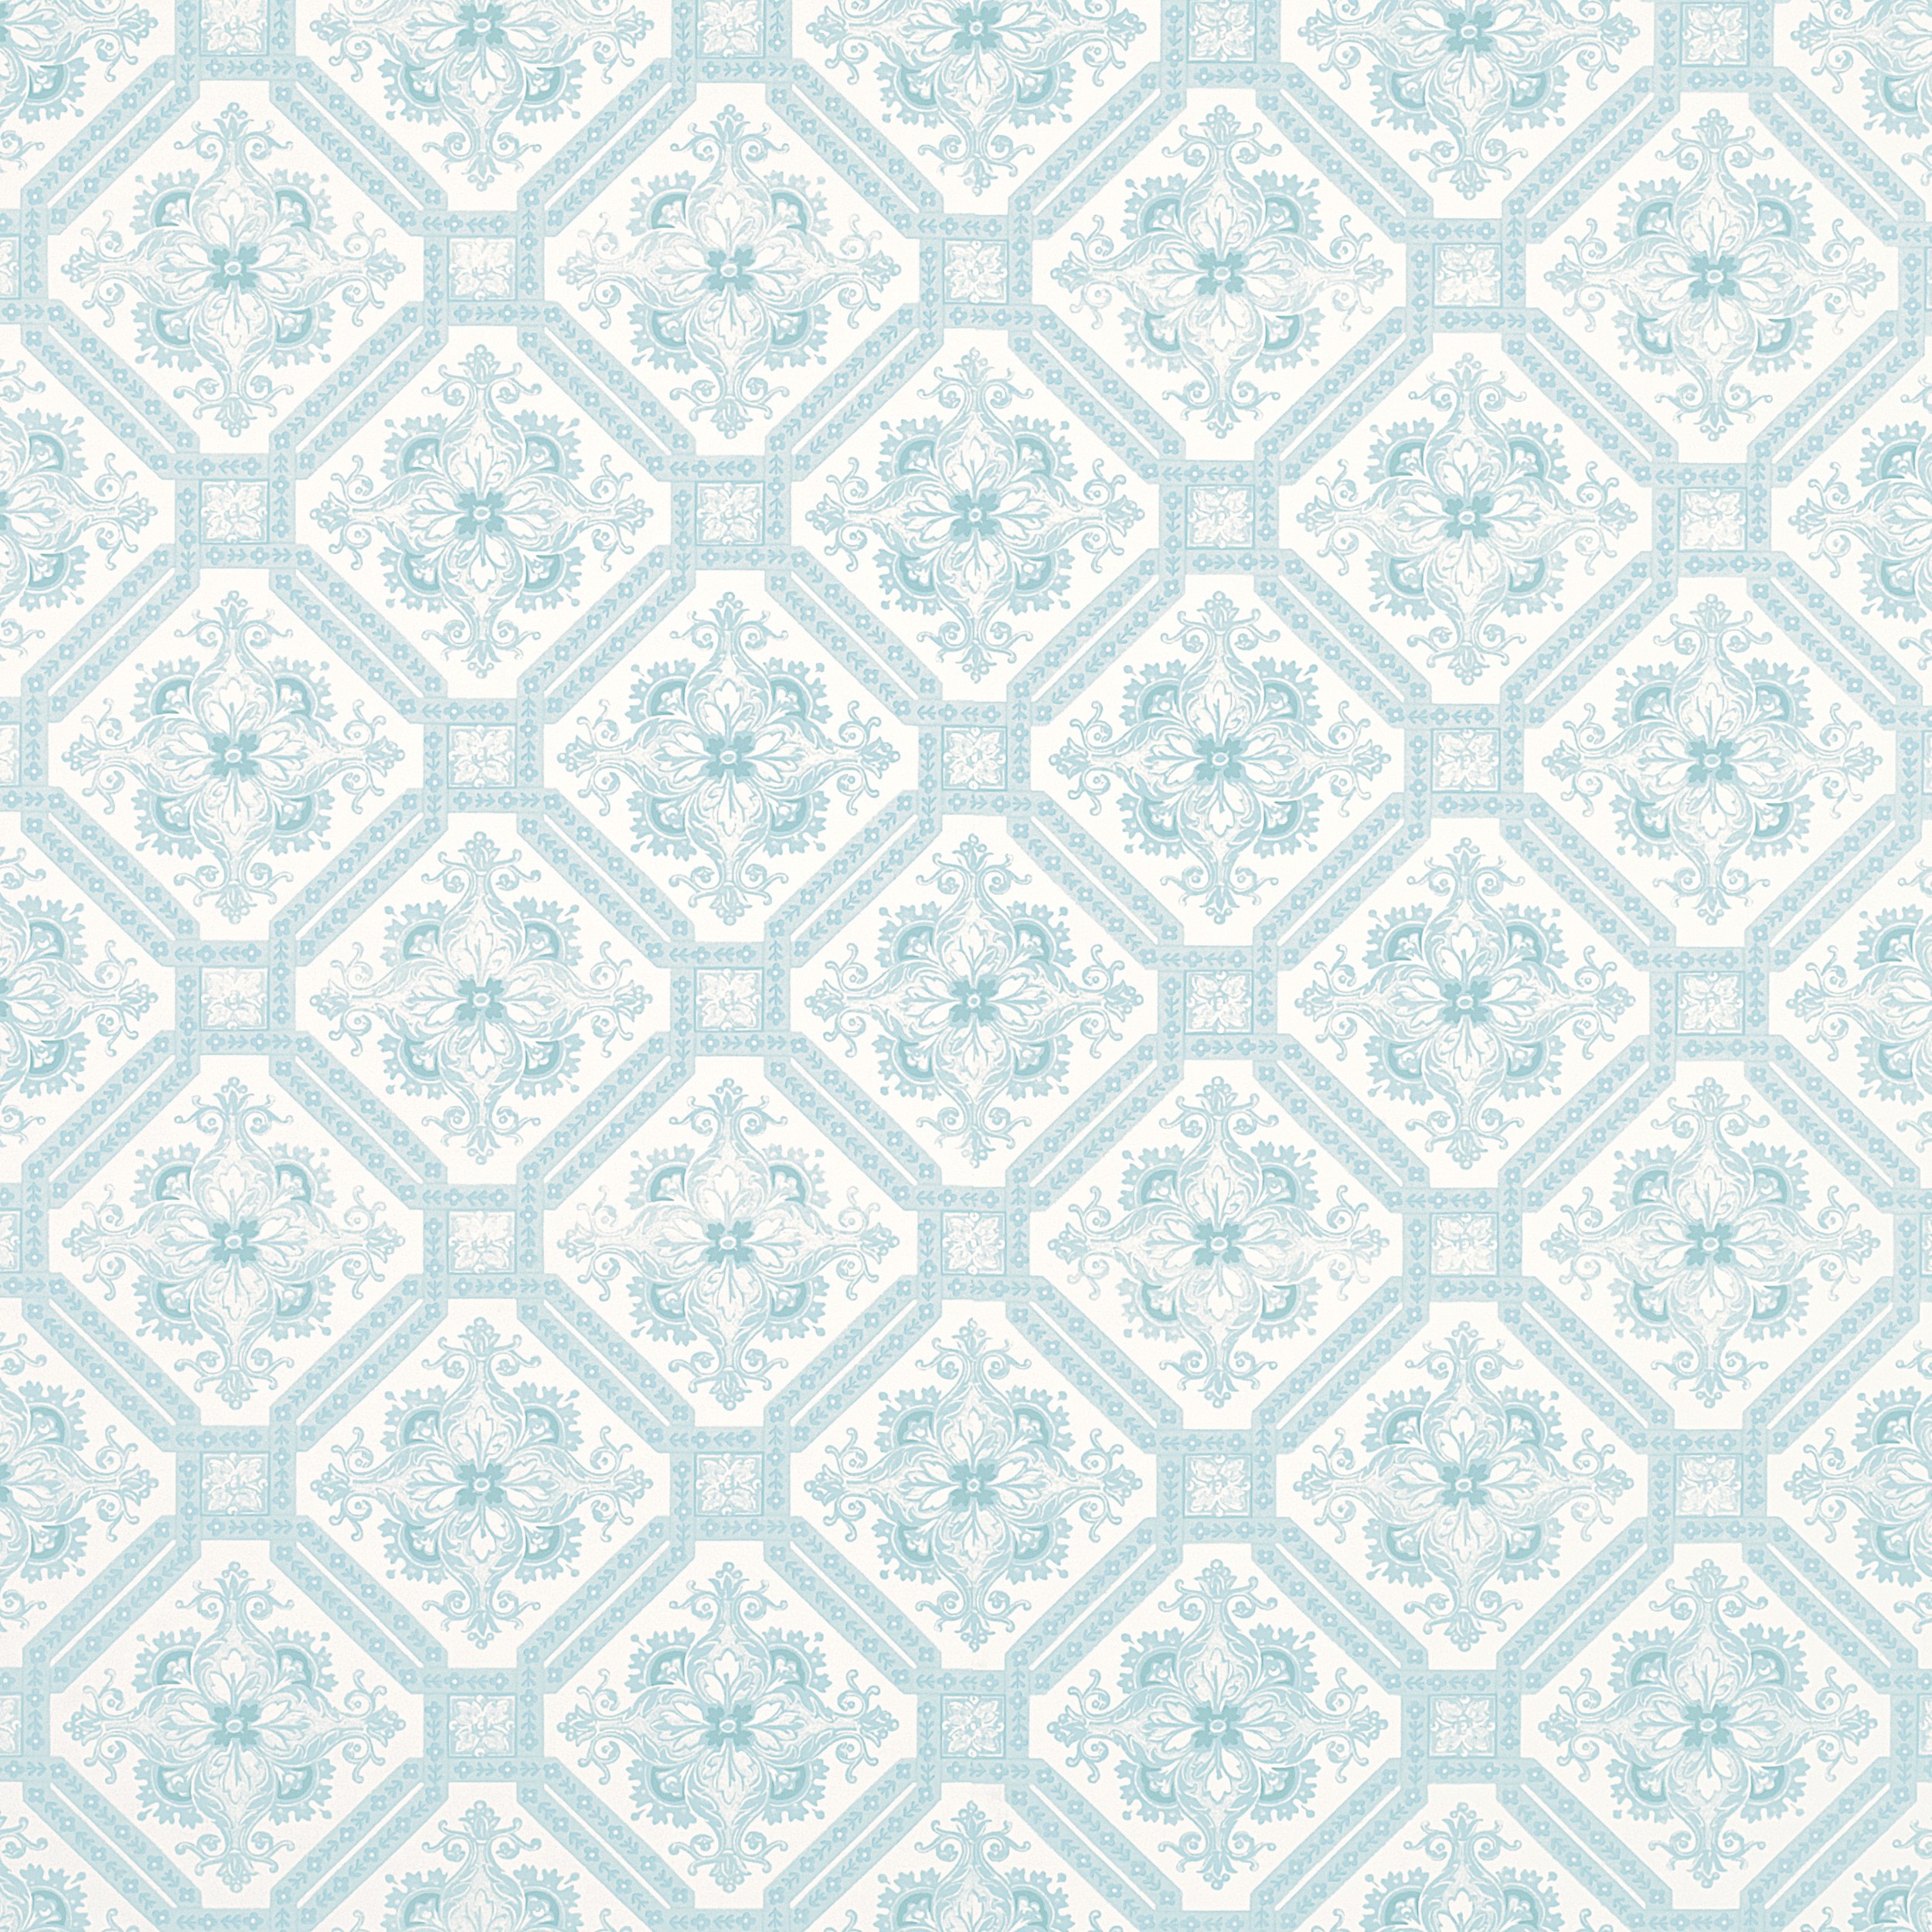 Animated Patterned Wallpaper